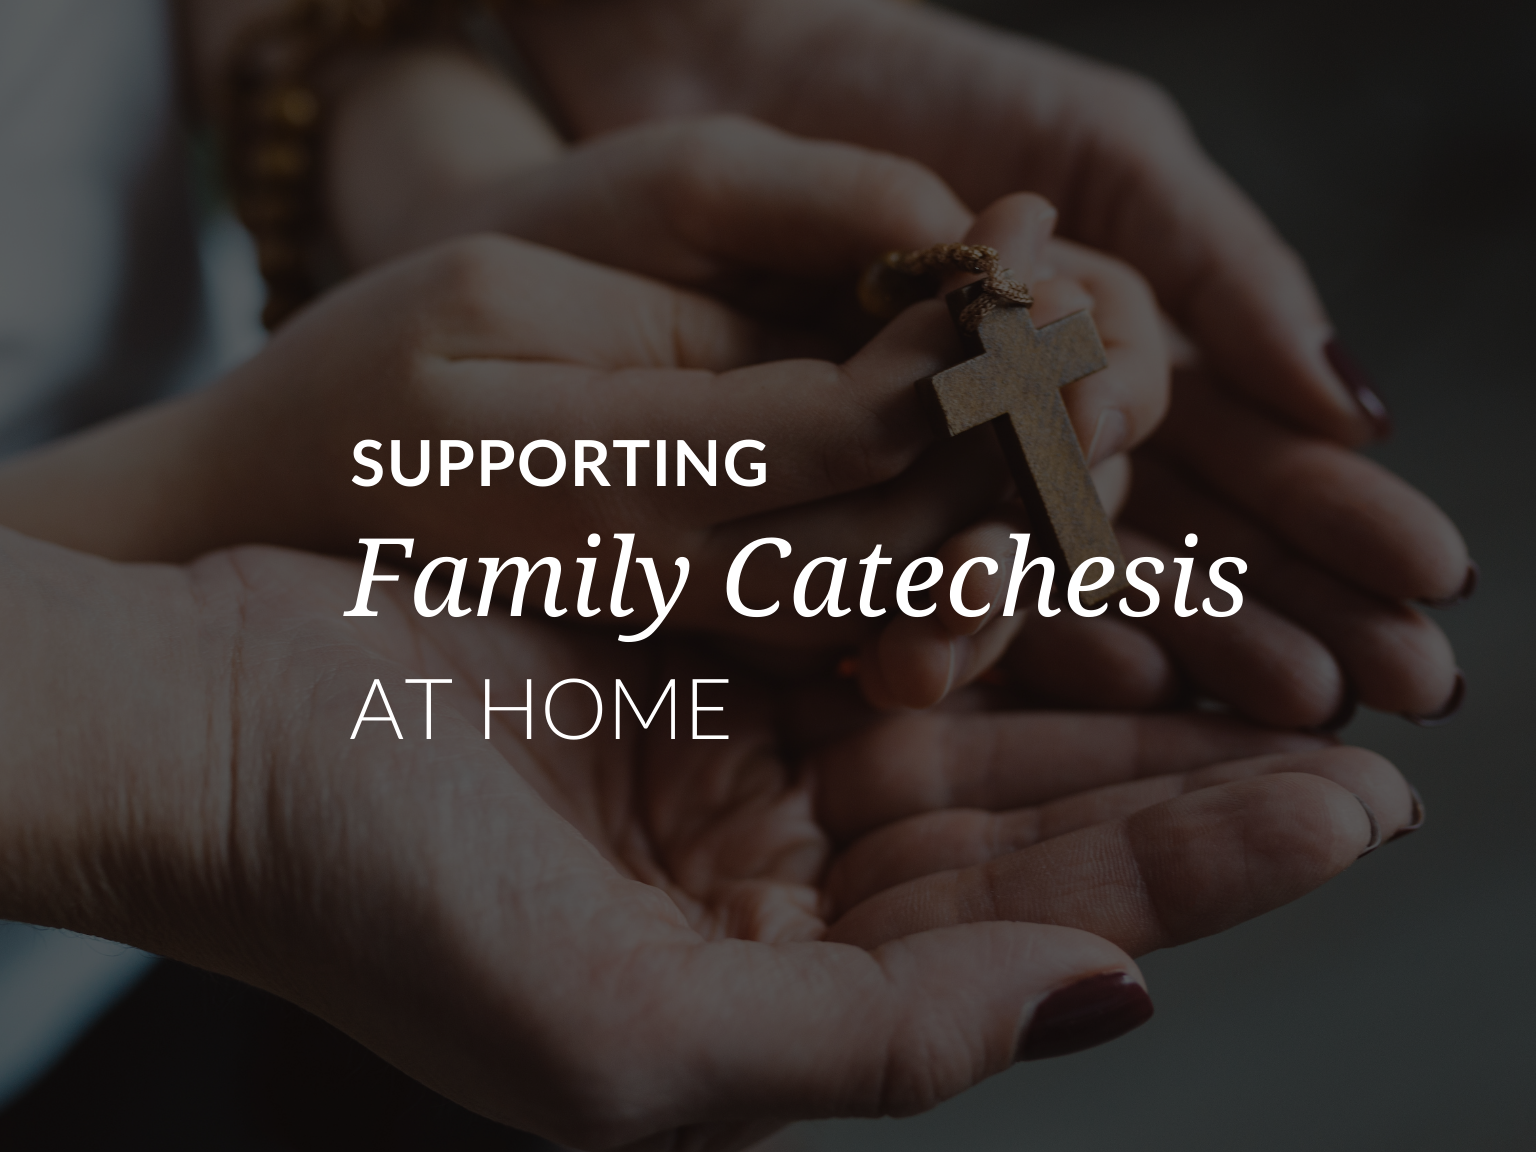 supporting-catholic-family-catechesis-at-home